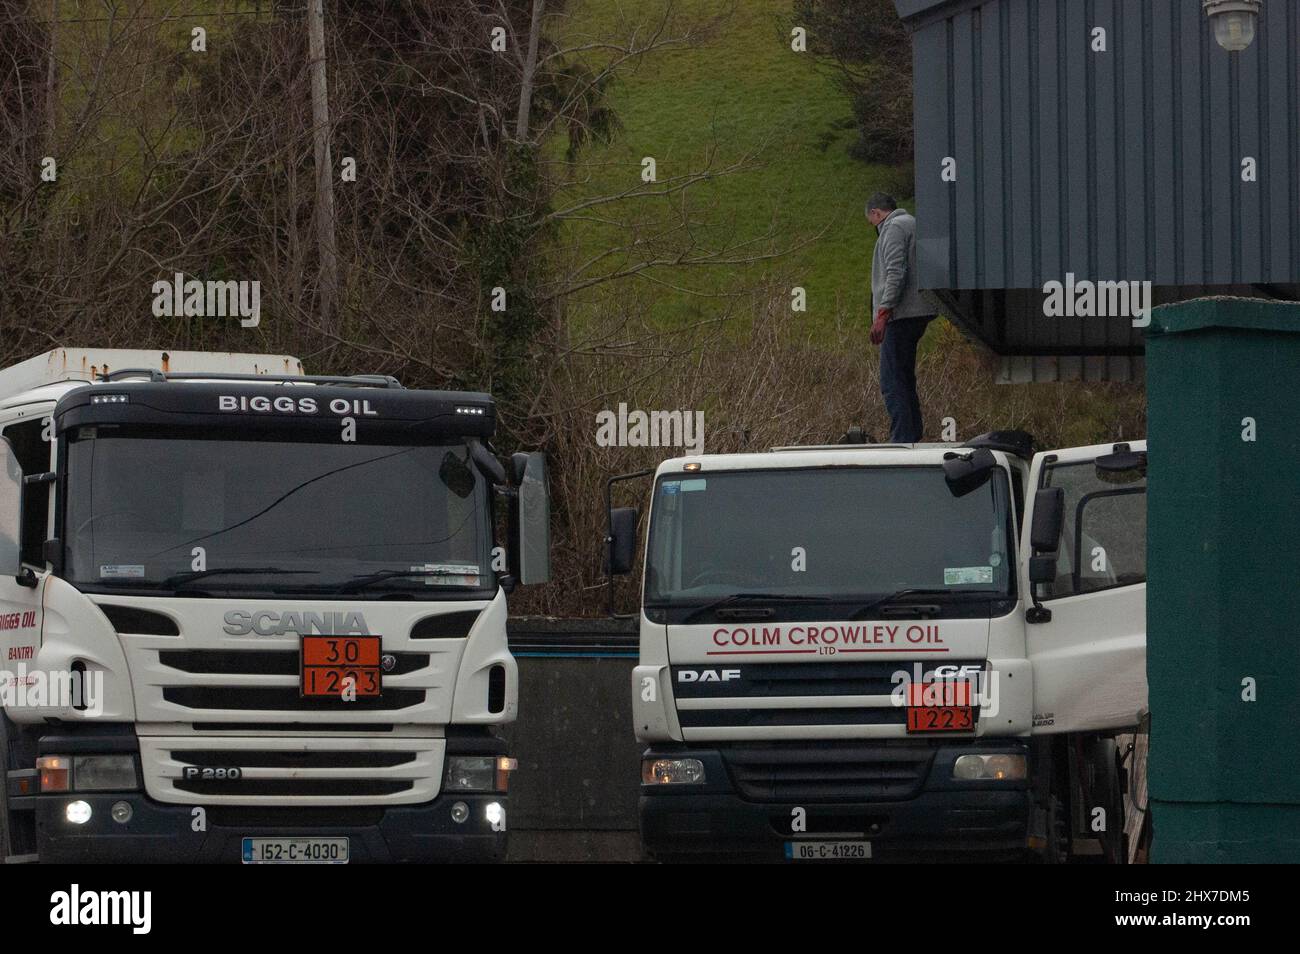 Bantry, West Cork Ireland, Thursday 10 Mar 2022; Motorists and home owners have been hit hard with the rising cost of oil due to the conflict between Russia and the Ukraine. The government reduced the carbon tax on fuels by 20 cent but prices remain high. Drivers fill their trucks at Biggs's Oil depot in Bantry. Kerosene is now priced at €1.70 a litre as a direct result of the crisis in Ukraine  Credit ED/Alamy Live News Stock Photo